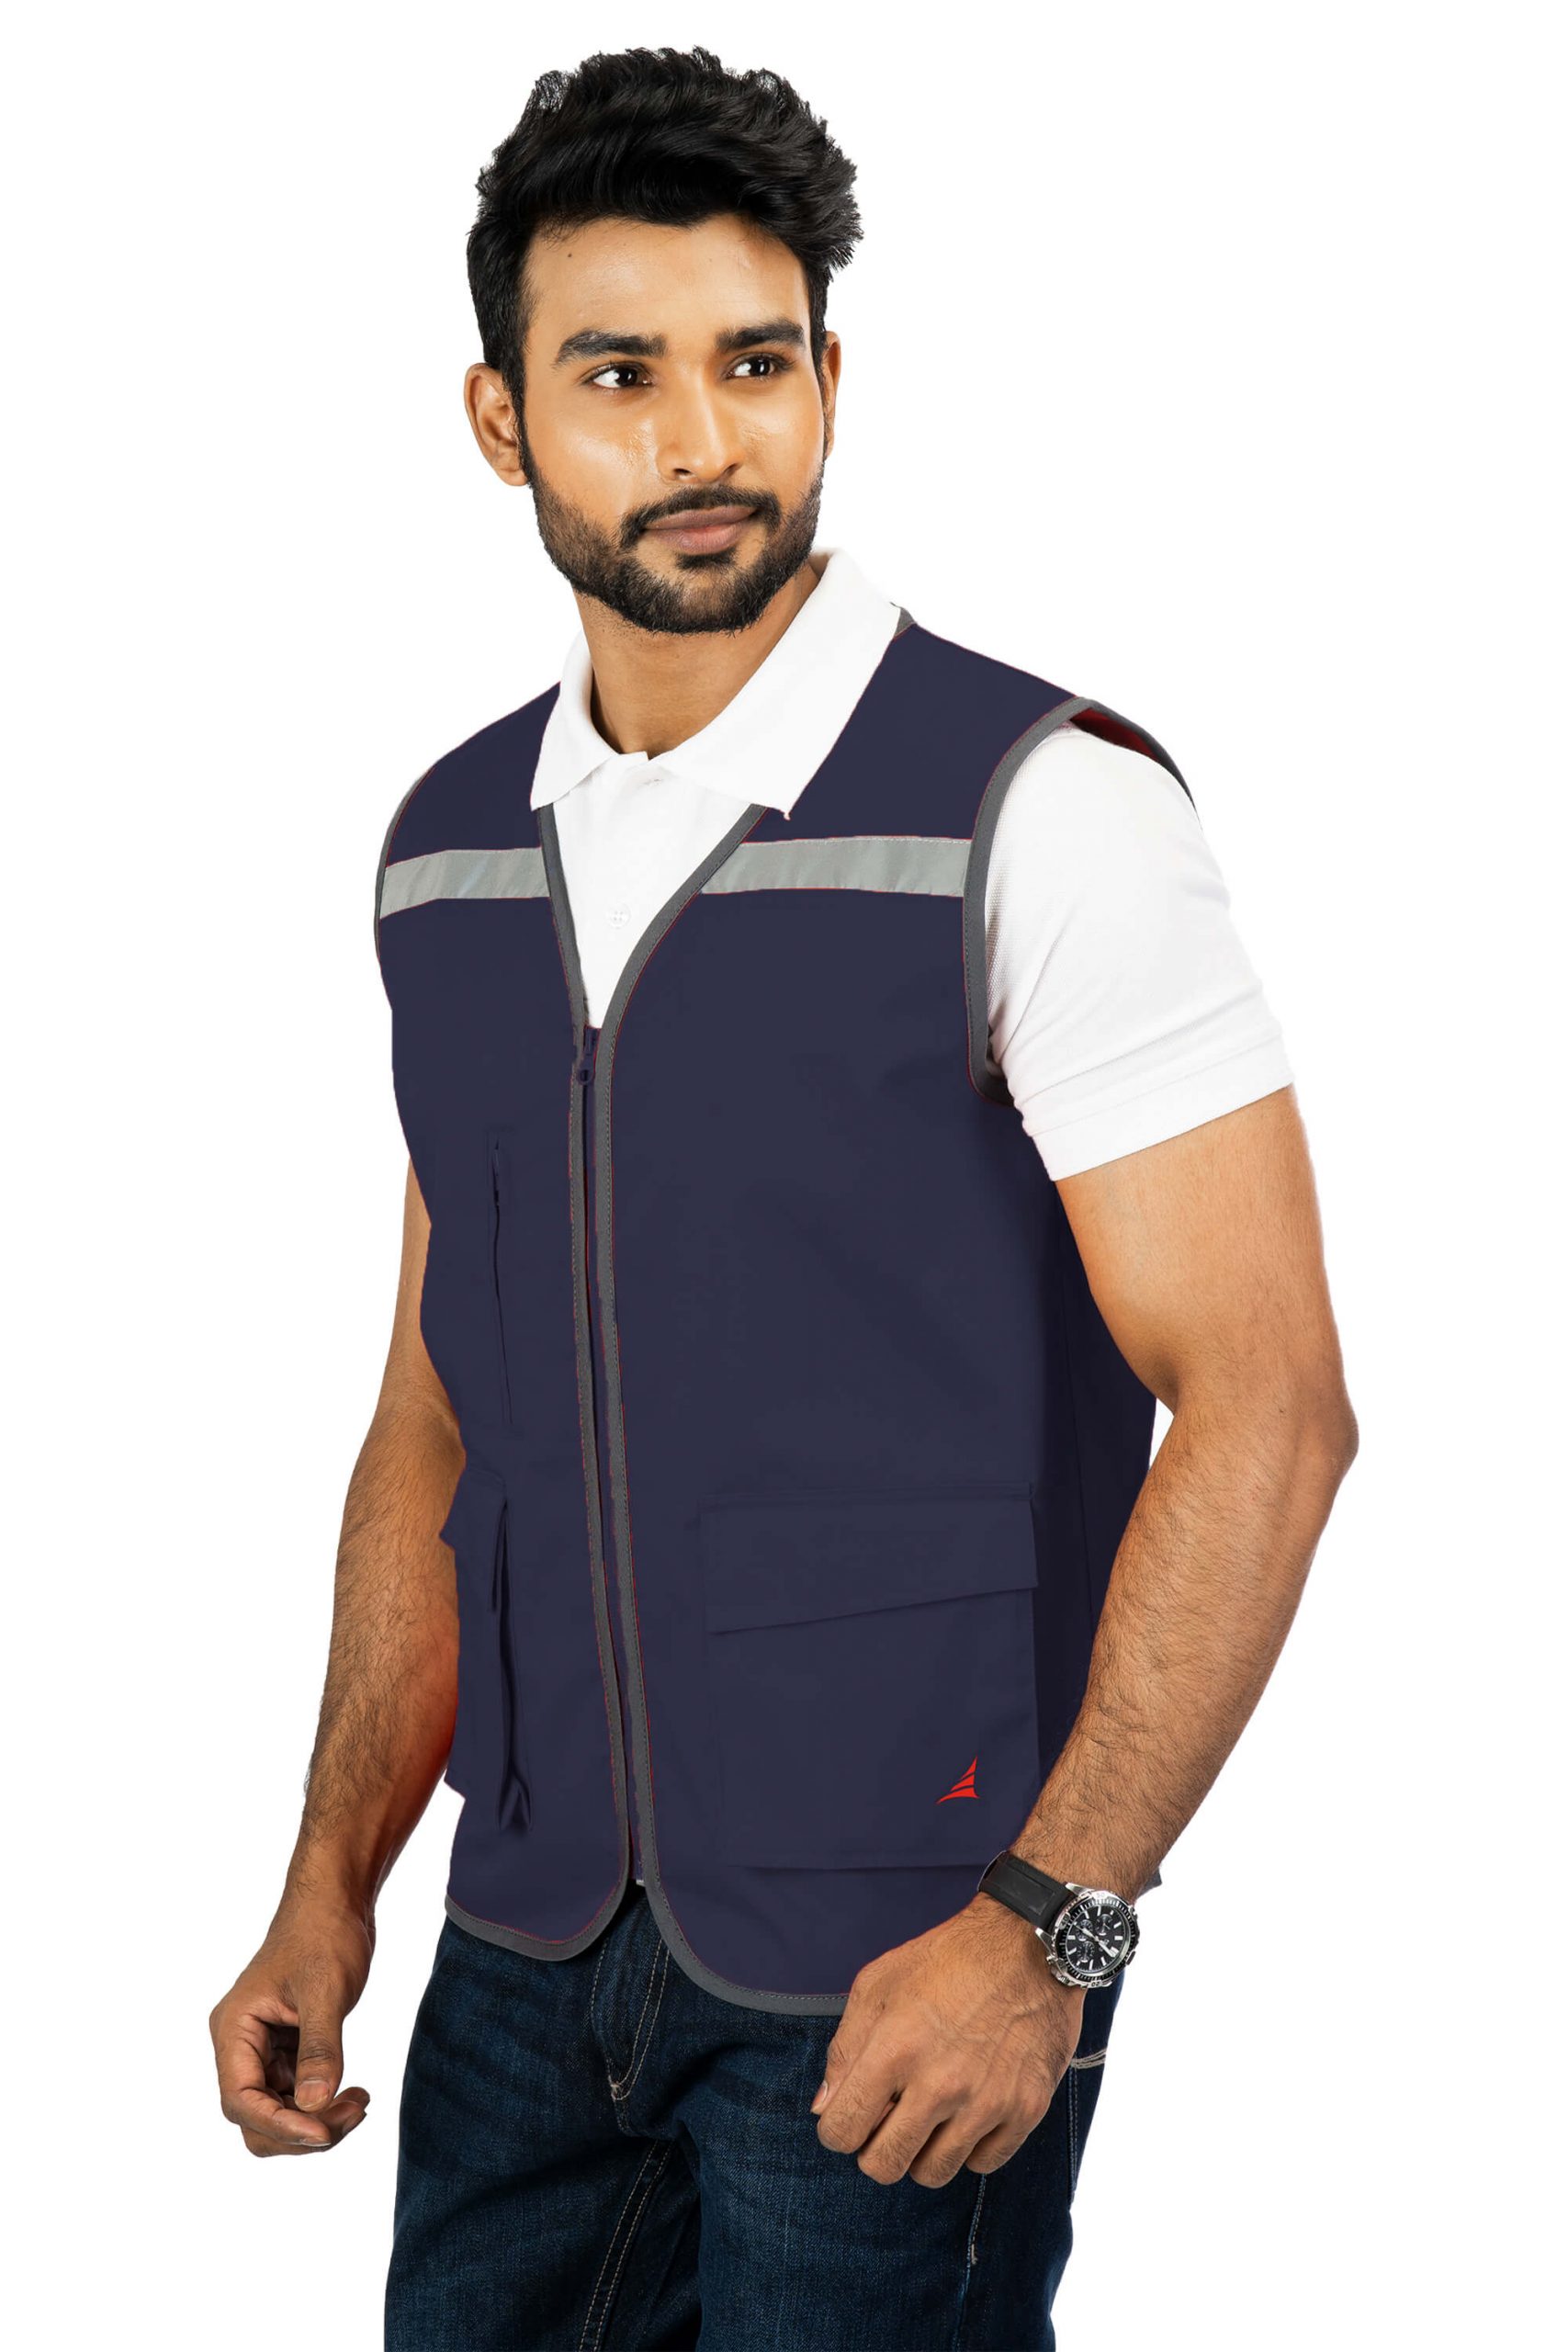 Ergonomically Designed Multi-utility Navy Adventure Vest With EN 20471 certified Silver Reflective tapes